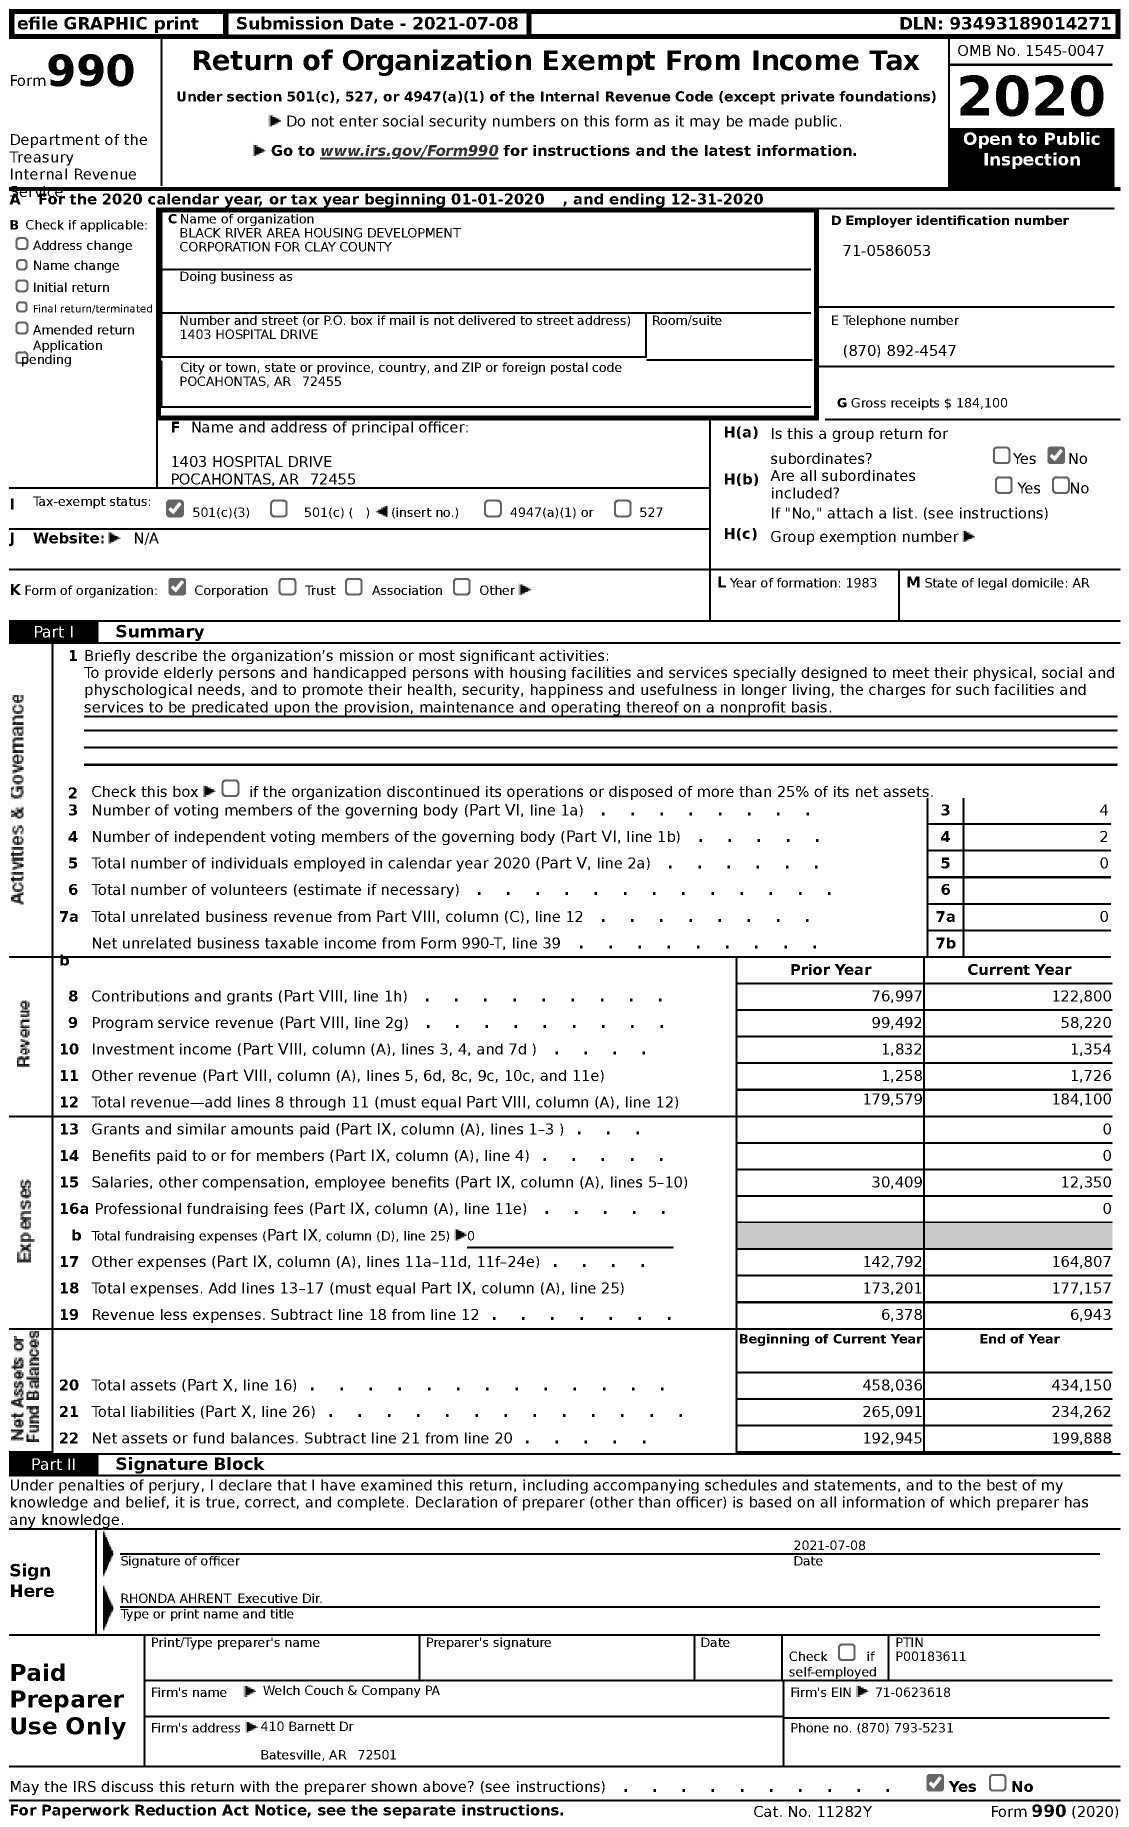 Image of first page of 2020 Form 990 for Black River Area Housing Development Corporation for Clay County